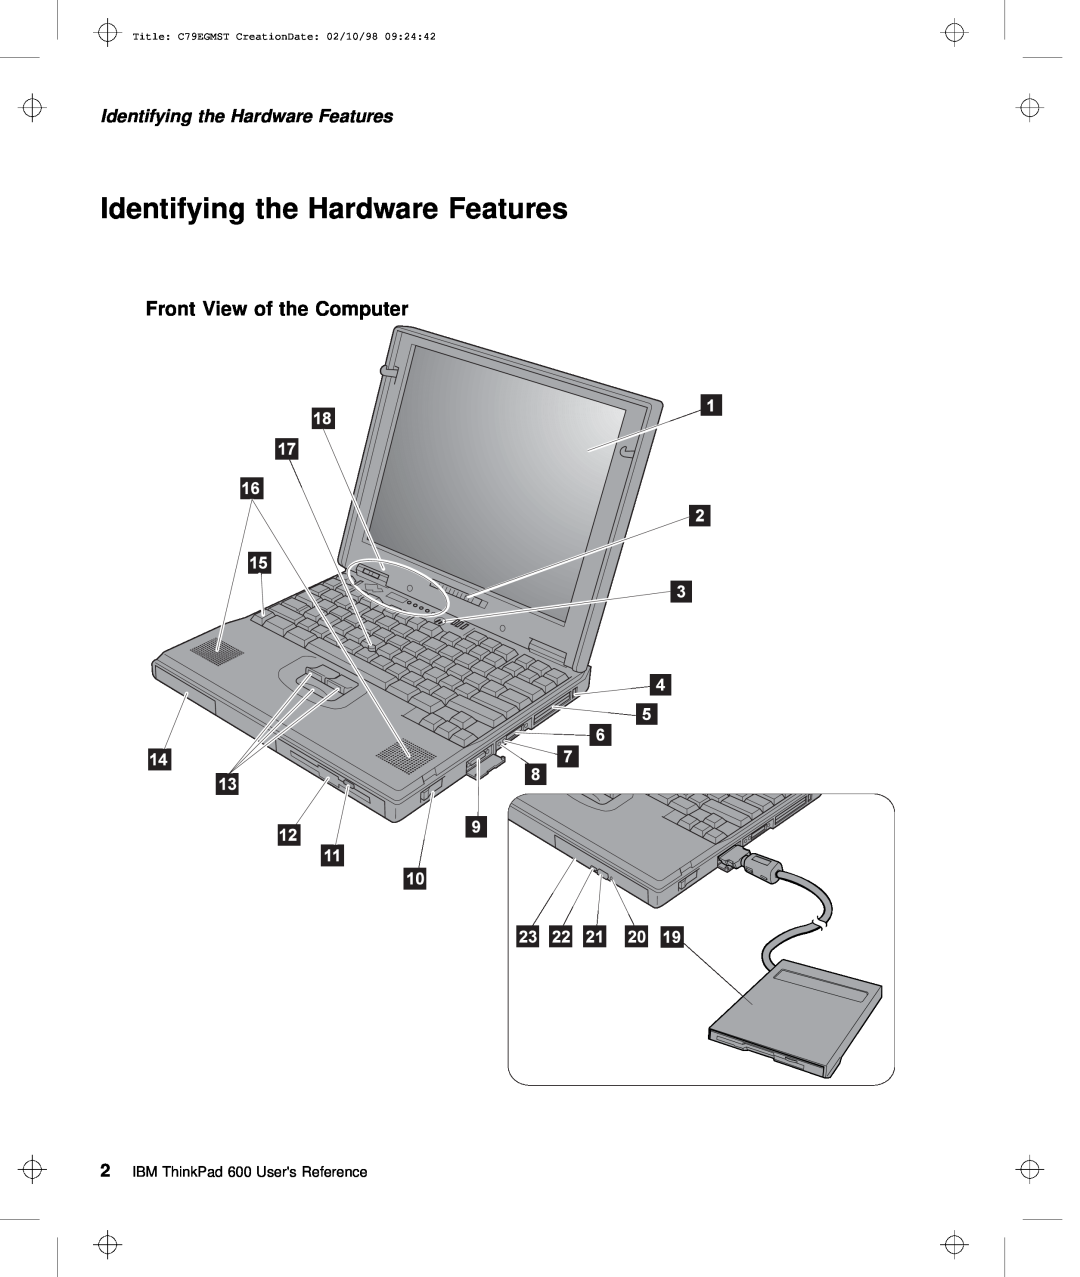 IBM manual Identifying the Hardware Features, Front View of the Computer, Title C79EGMST CreationDate 02/10/98 